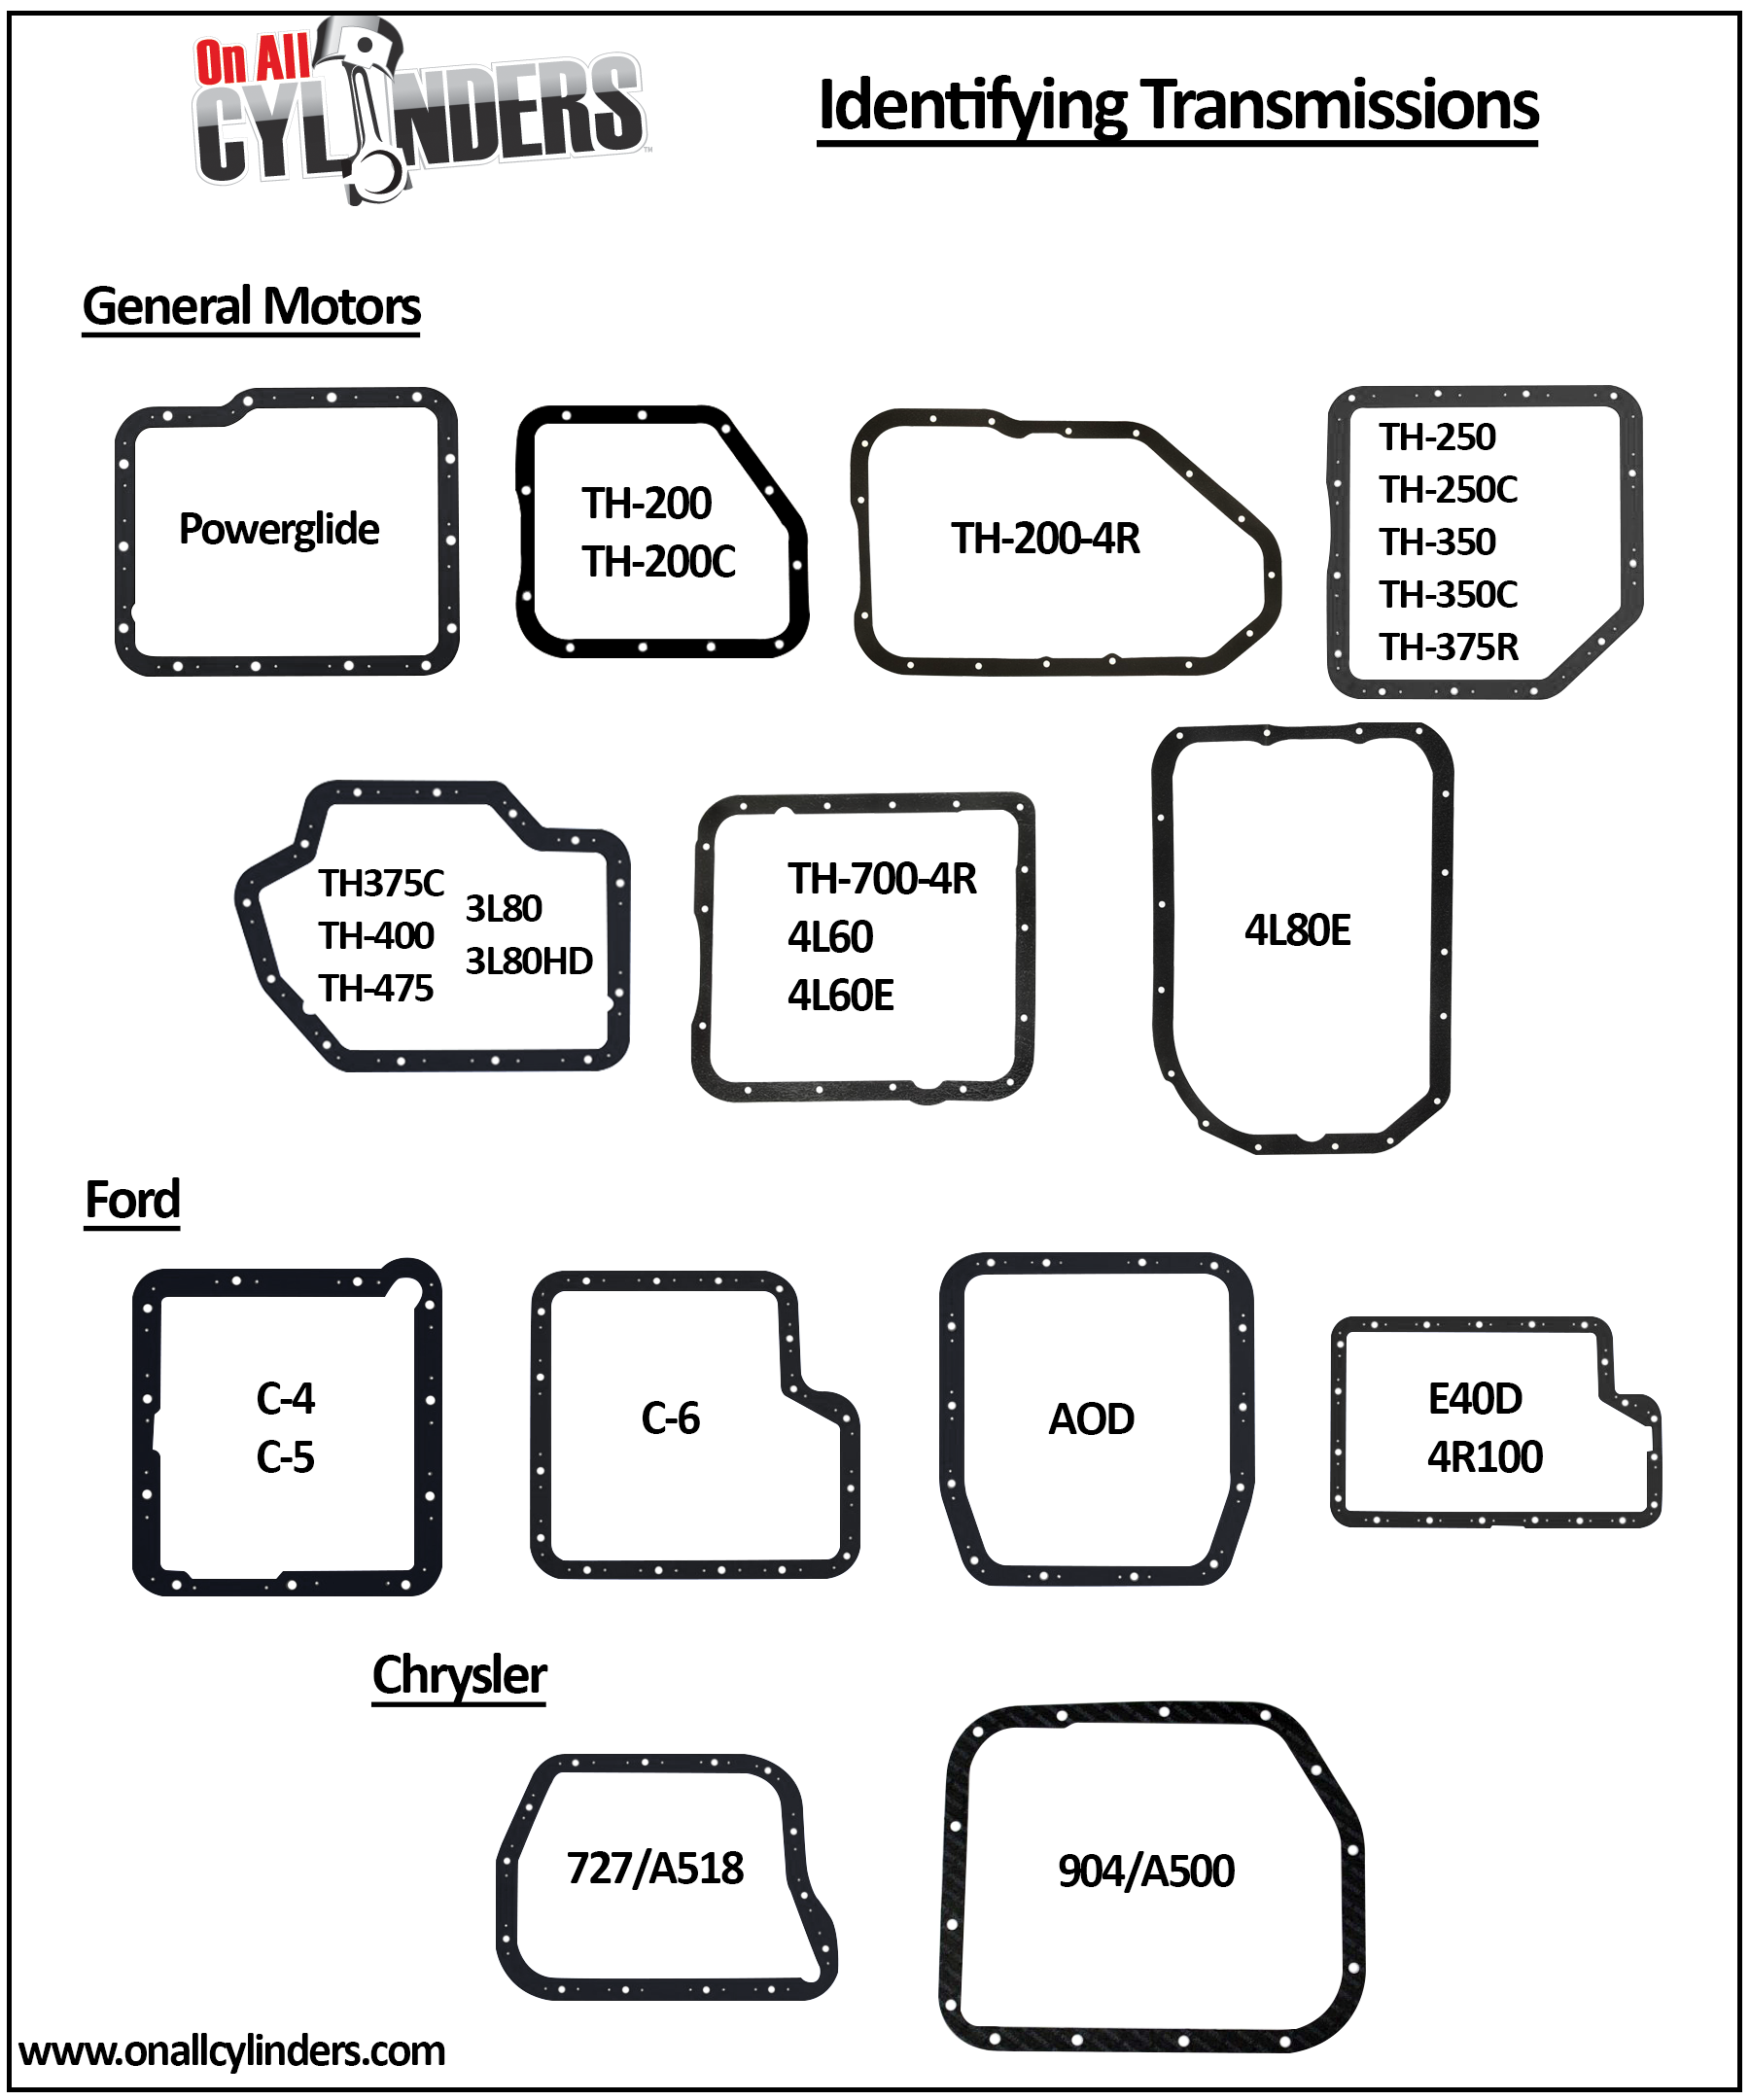 Ford Manual Transmission Identification Chart